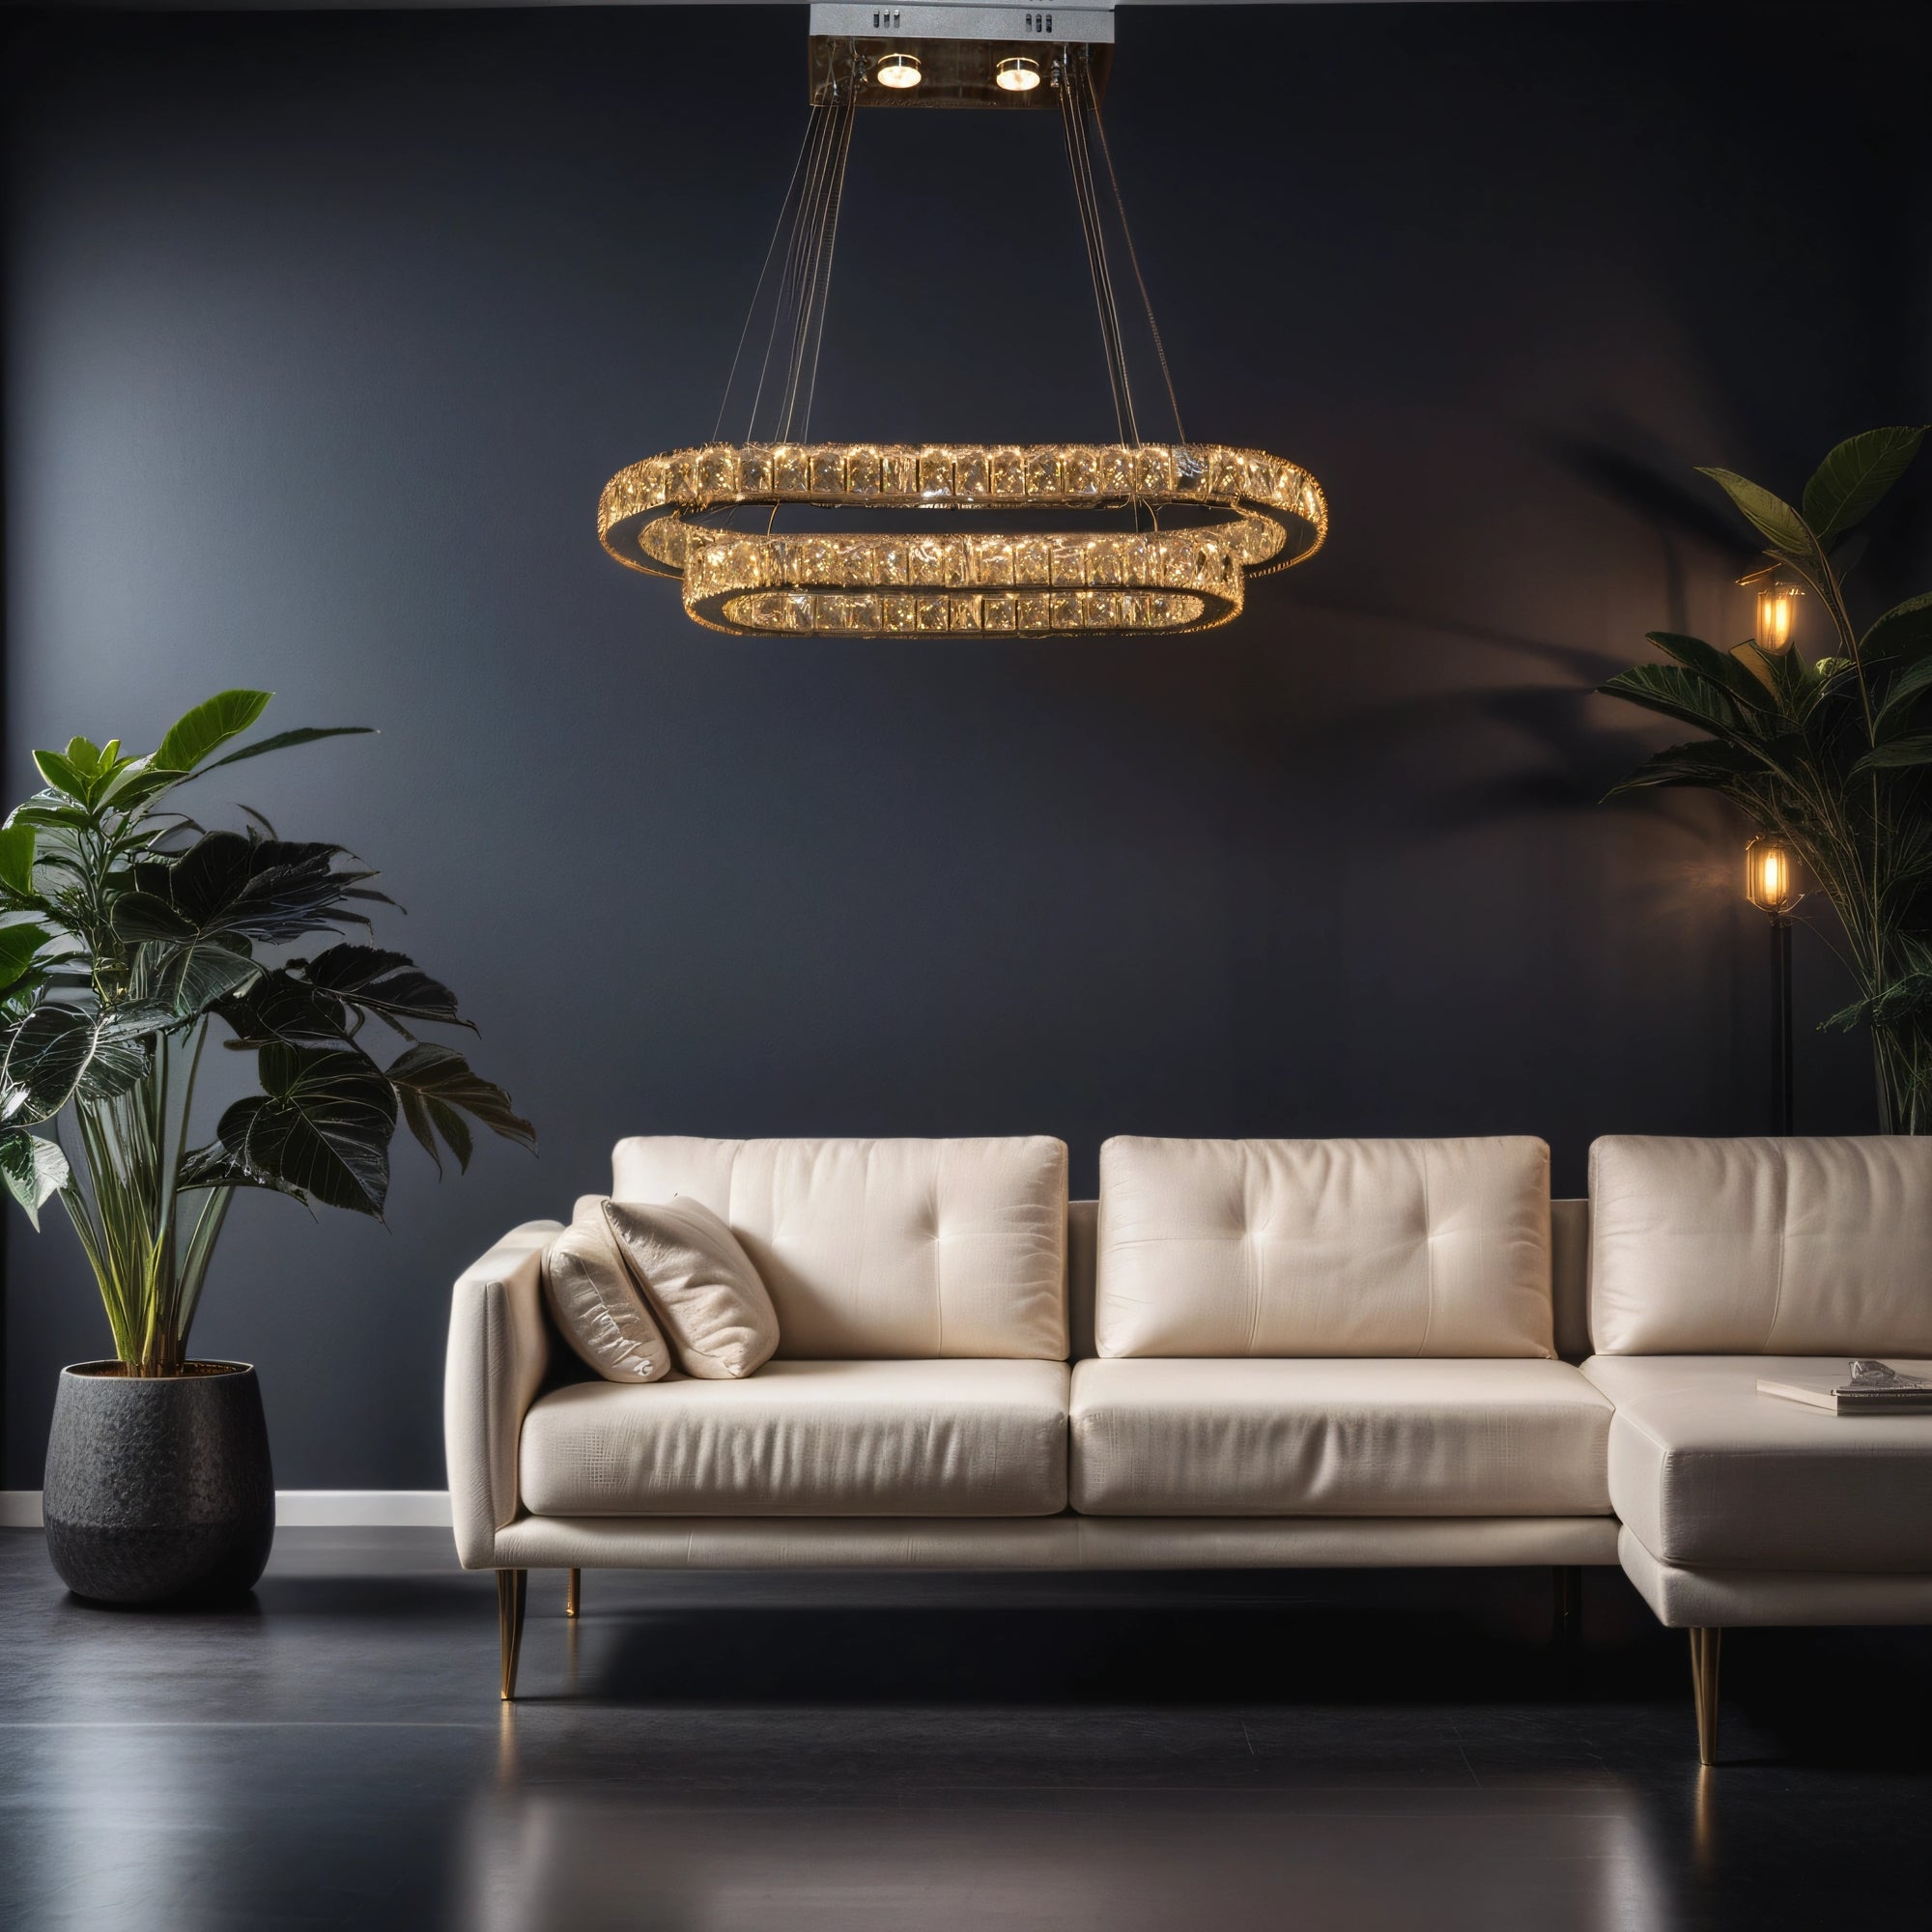 Oval LED 2 Crystal Pendant Ceiling Light-Colour Changing Dimmable with Remote Control-9011-700*500-77*39*15cm-Chrome